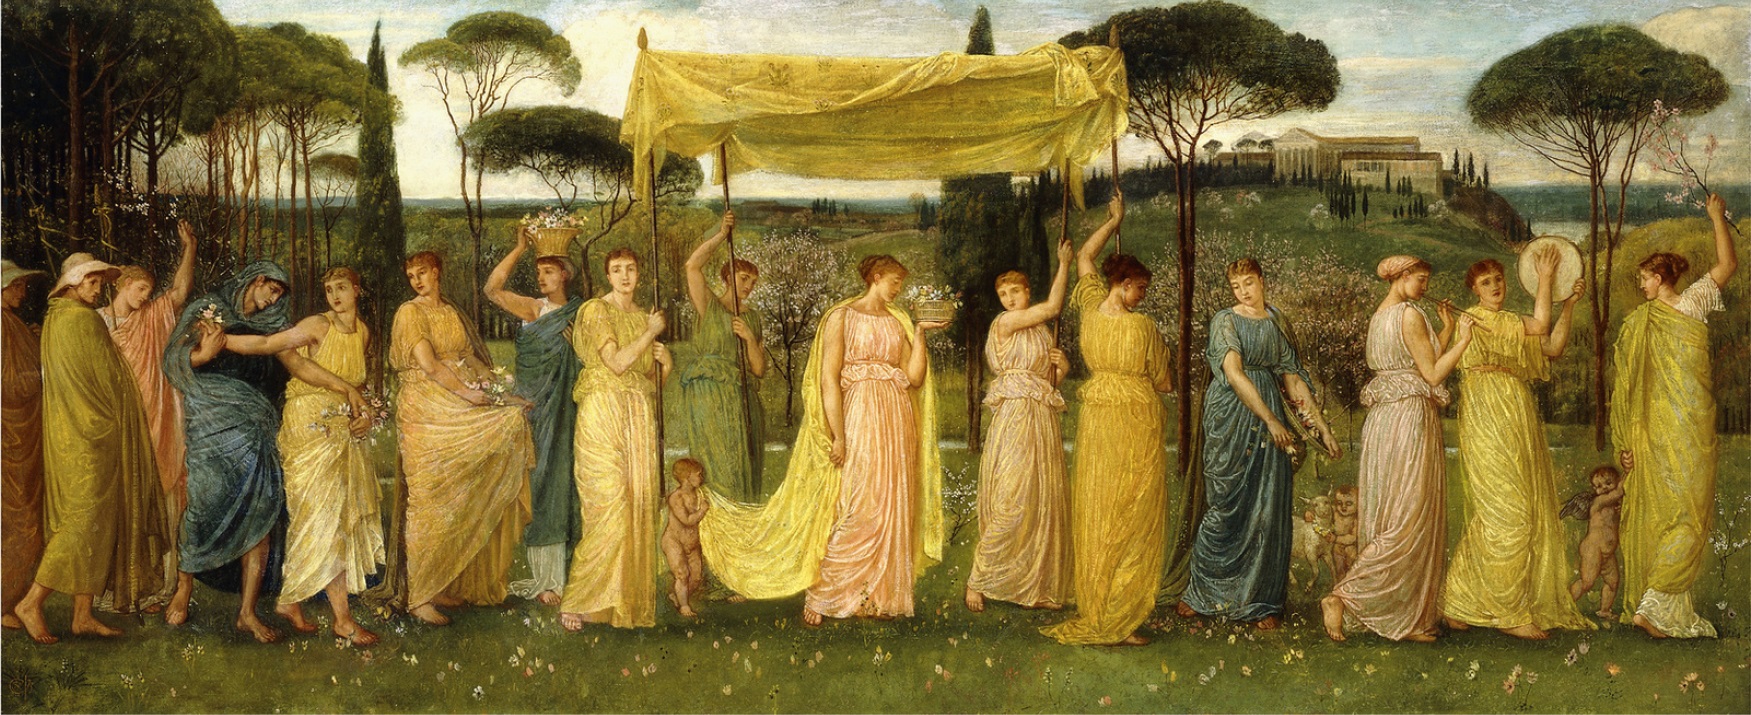 File:Walter T. Crane - The Advent of Spring (1873).jpg ...